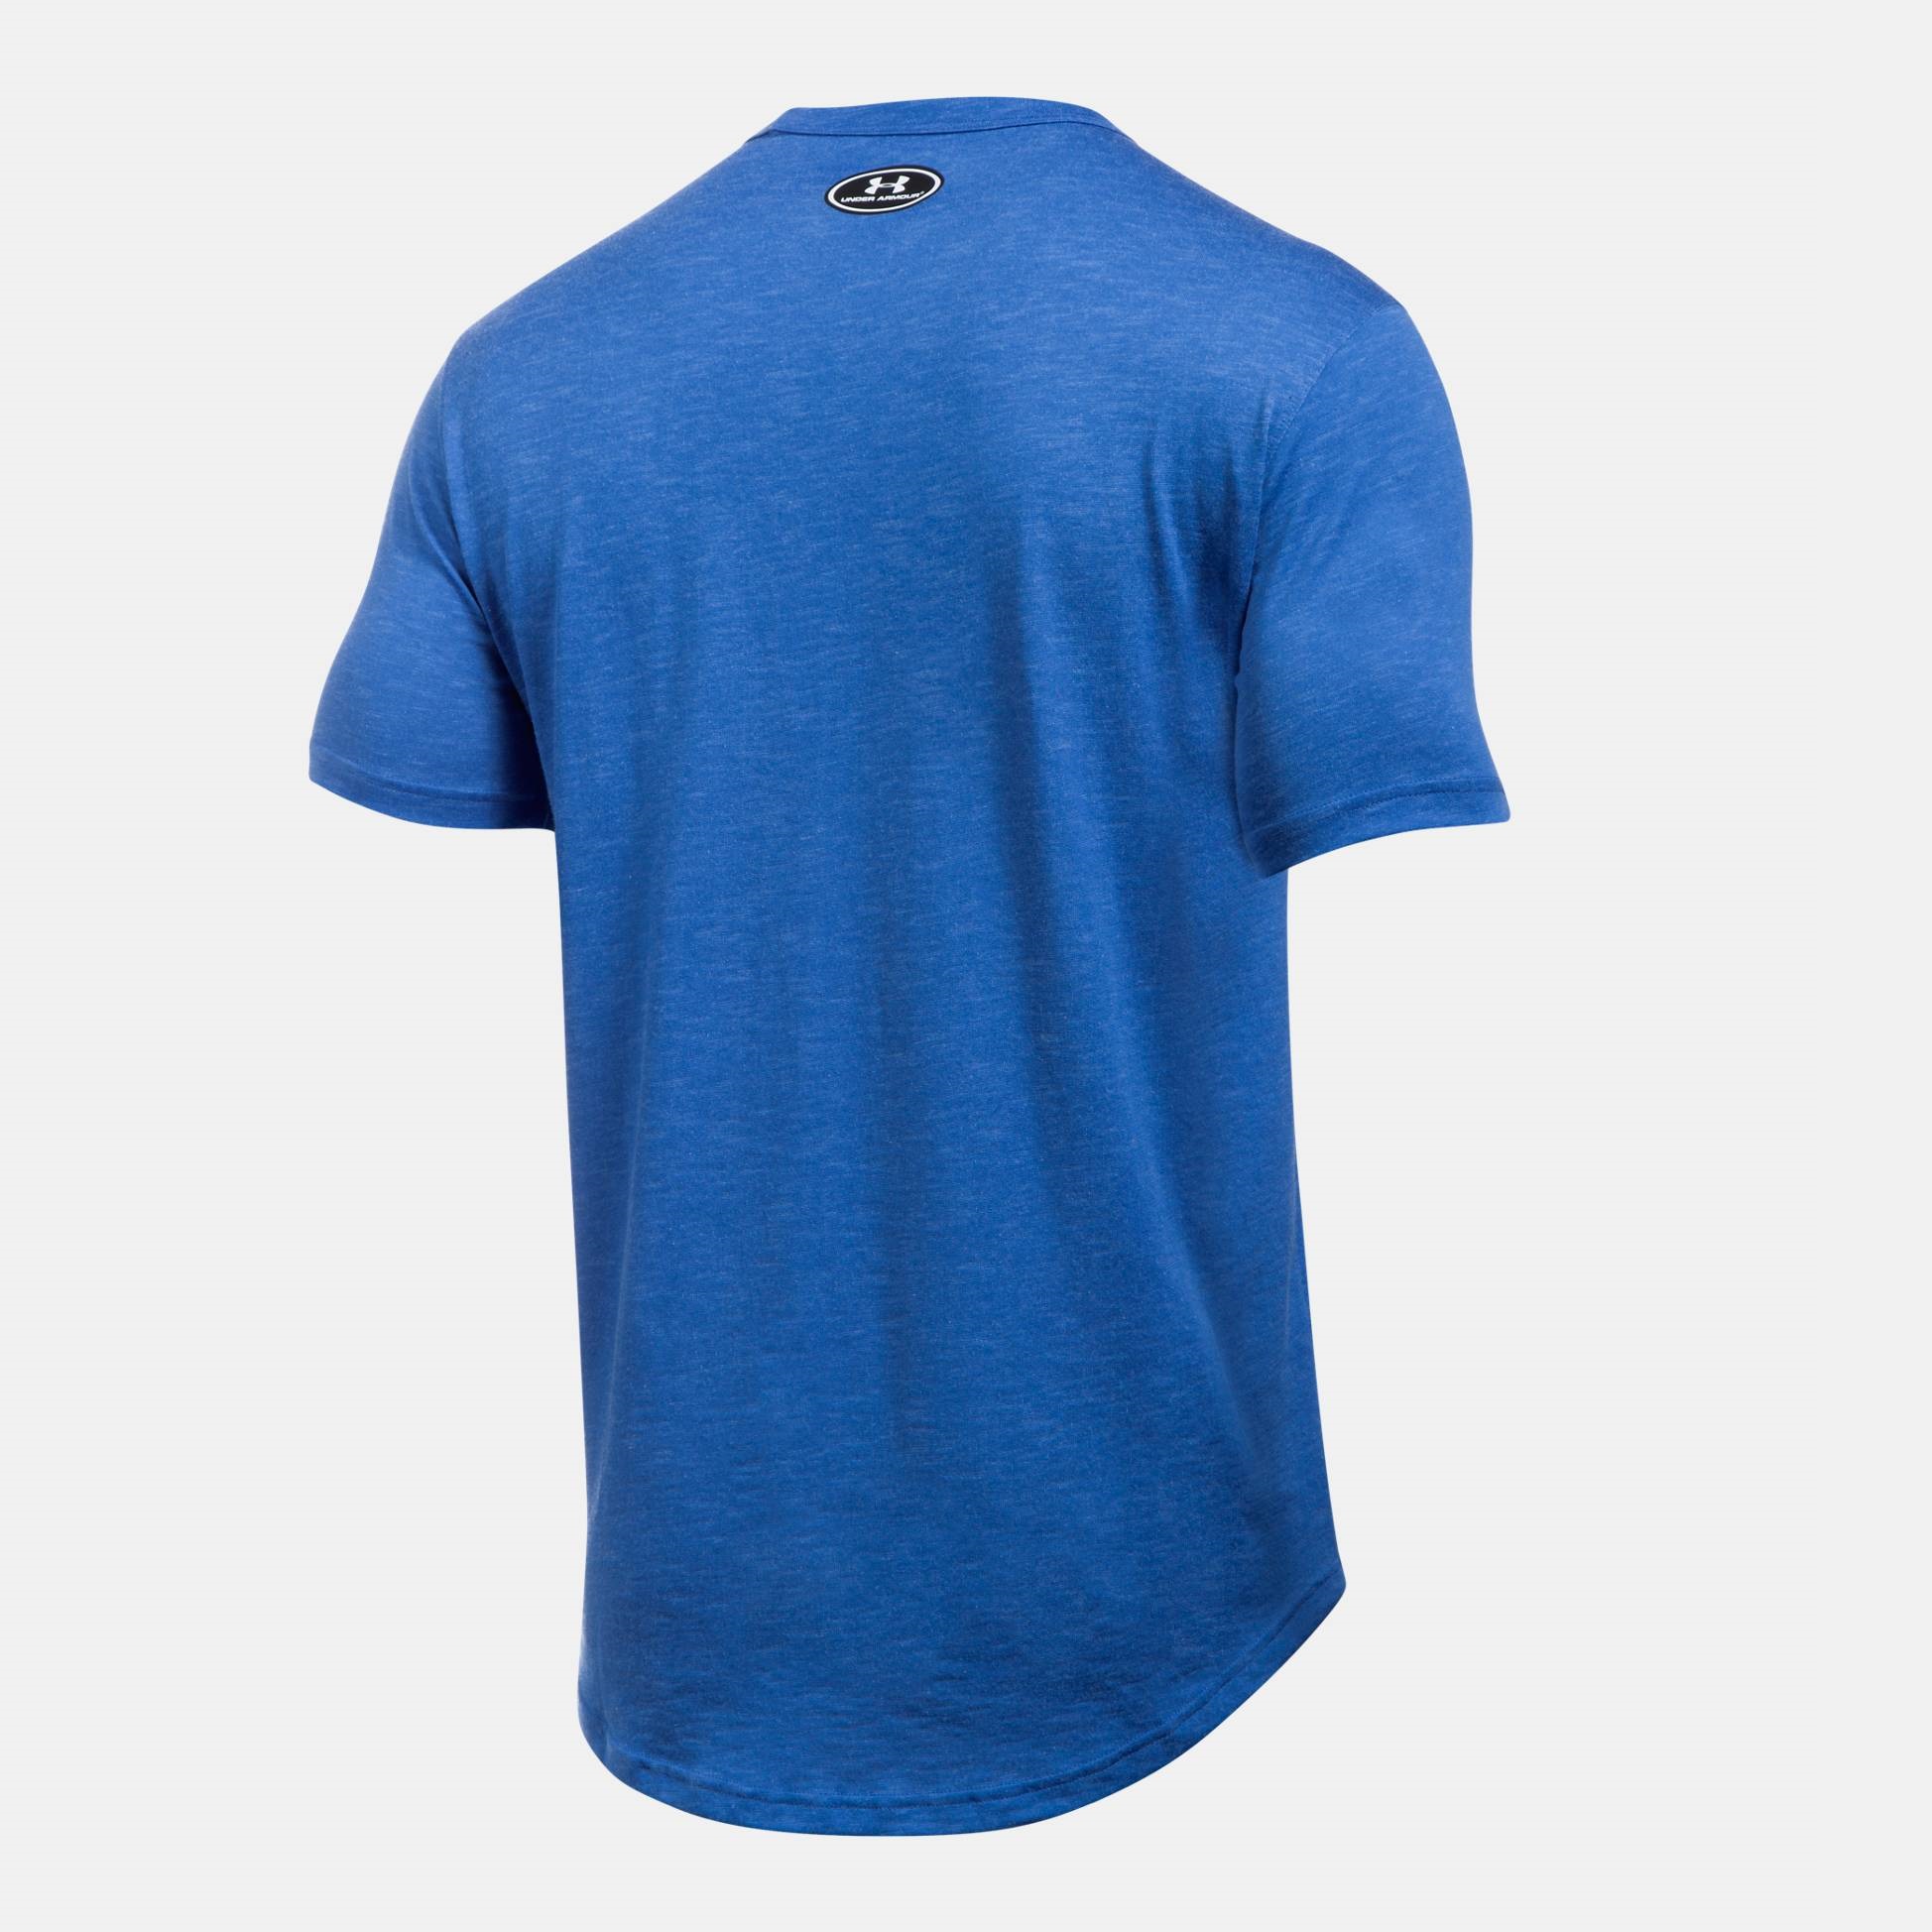  -  under armour Sportsyle Branded T-Shirt